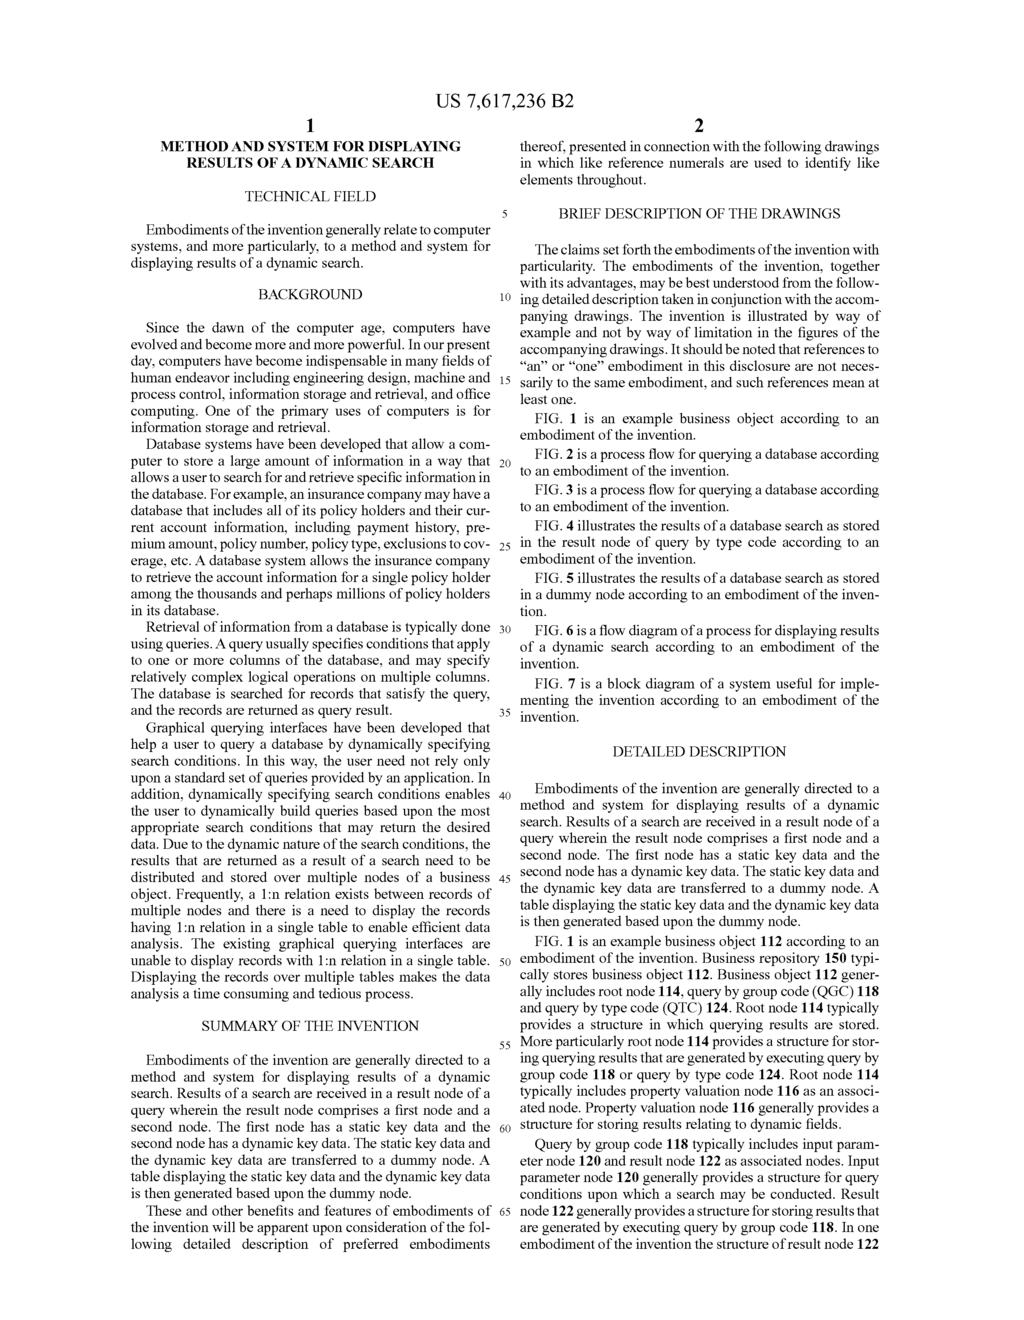 1. METHOD AND SYSTEM FOR DISPLAYING RESULTS OF A DYNAMIC SEARCH TECHNICAL FIELD Embodiments of the invention generally relate to computer systems, and more particularly, to a method and system for